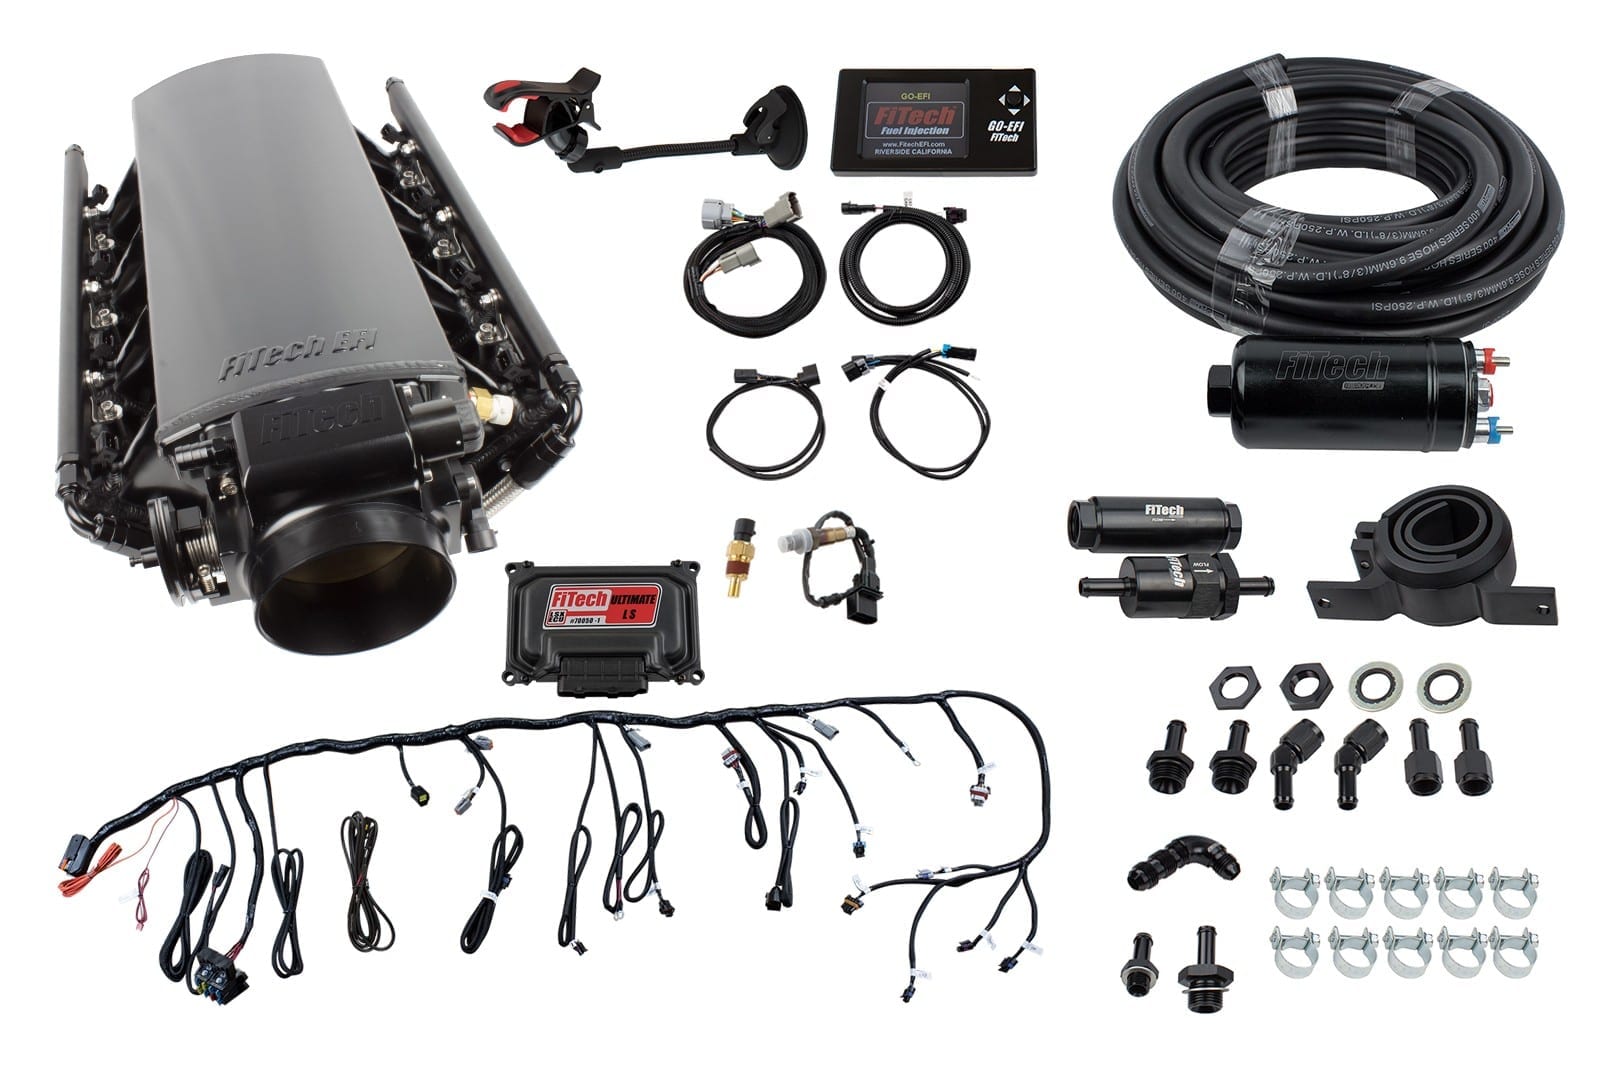 FiTech 71018 Ultimate LS Kit (750 HP, Transmission Control, Inline Fuel Pump)-for LS7